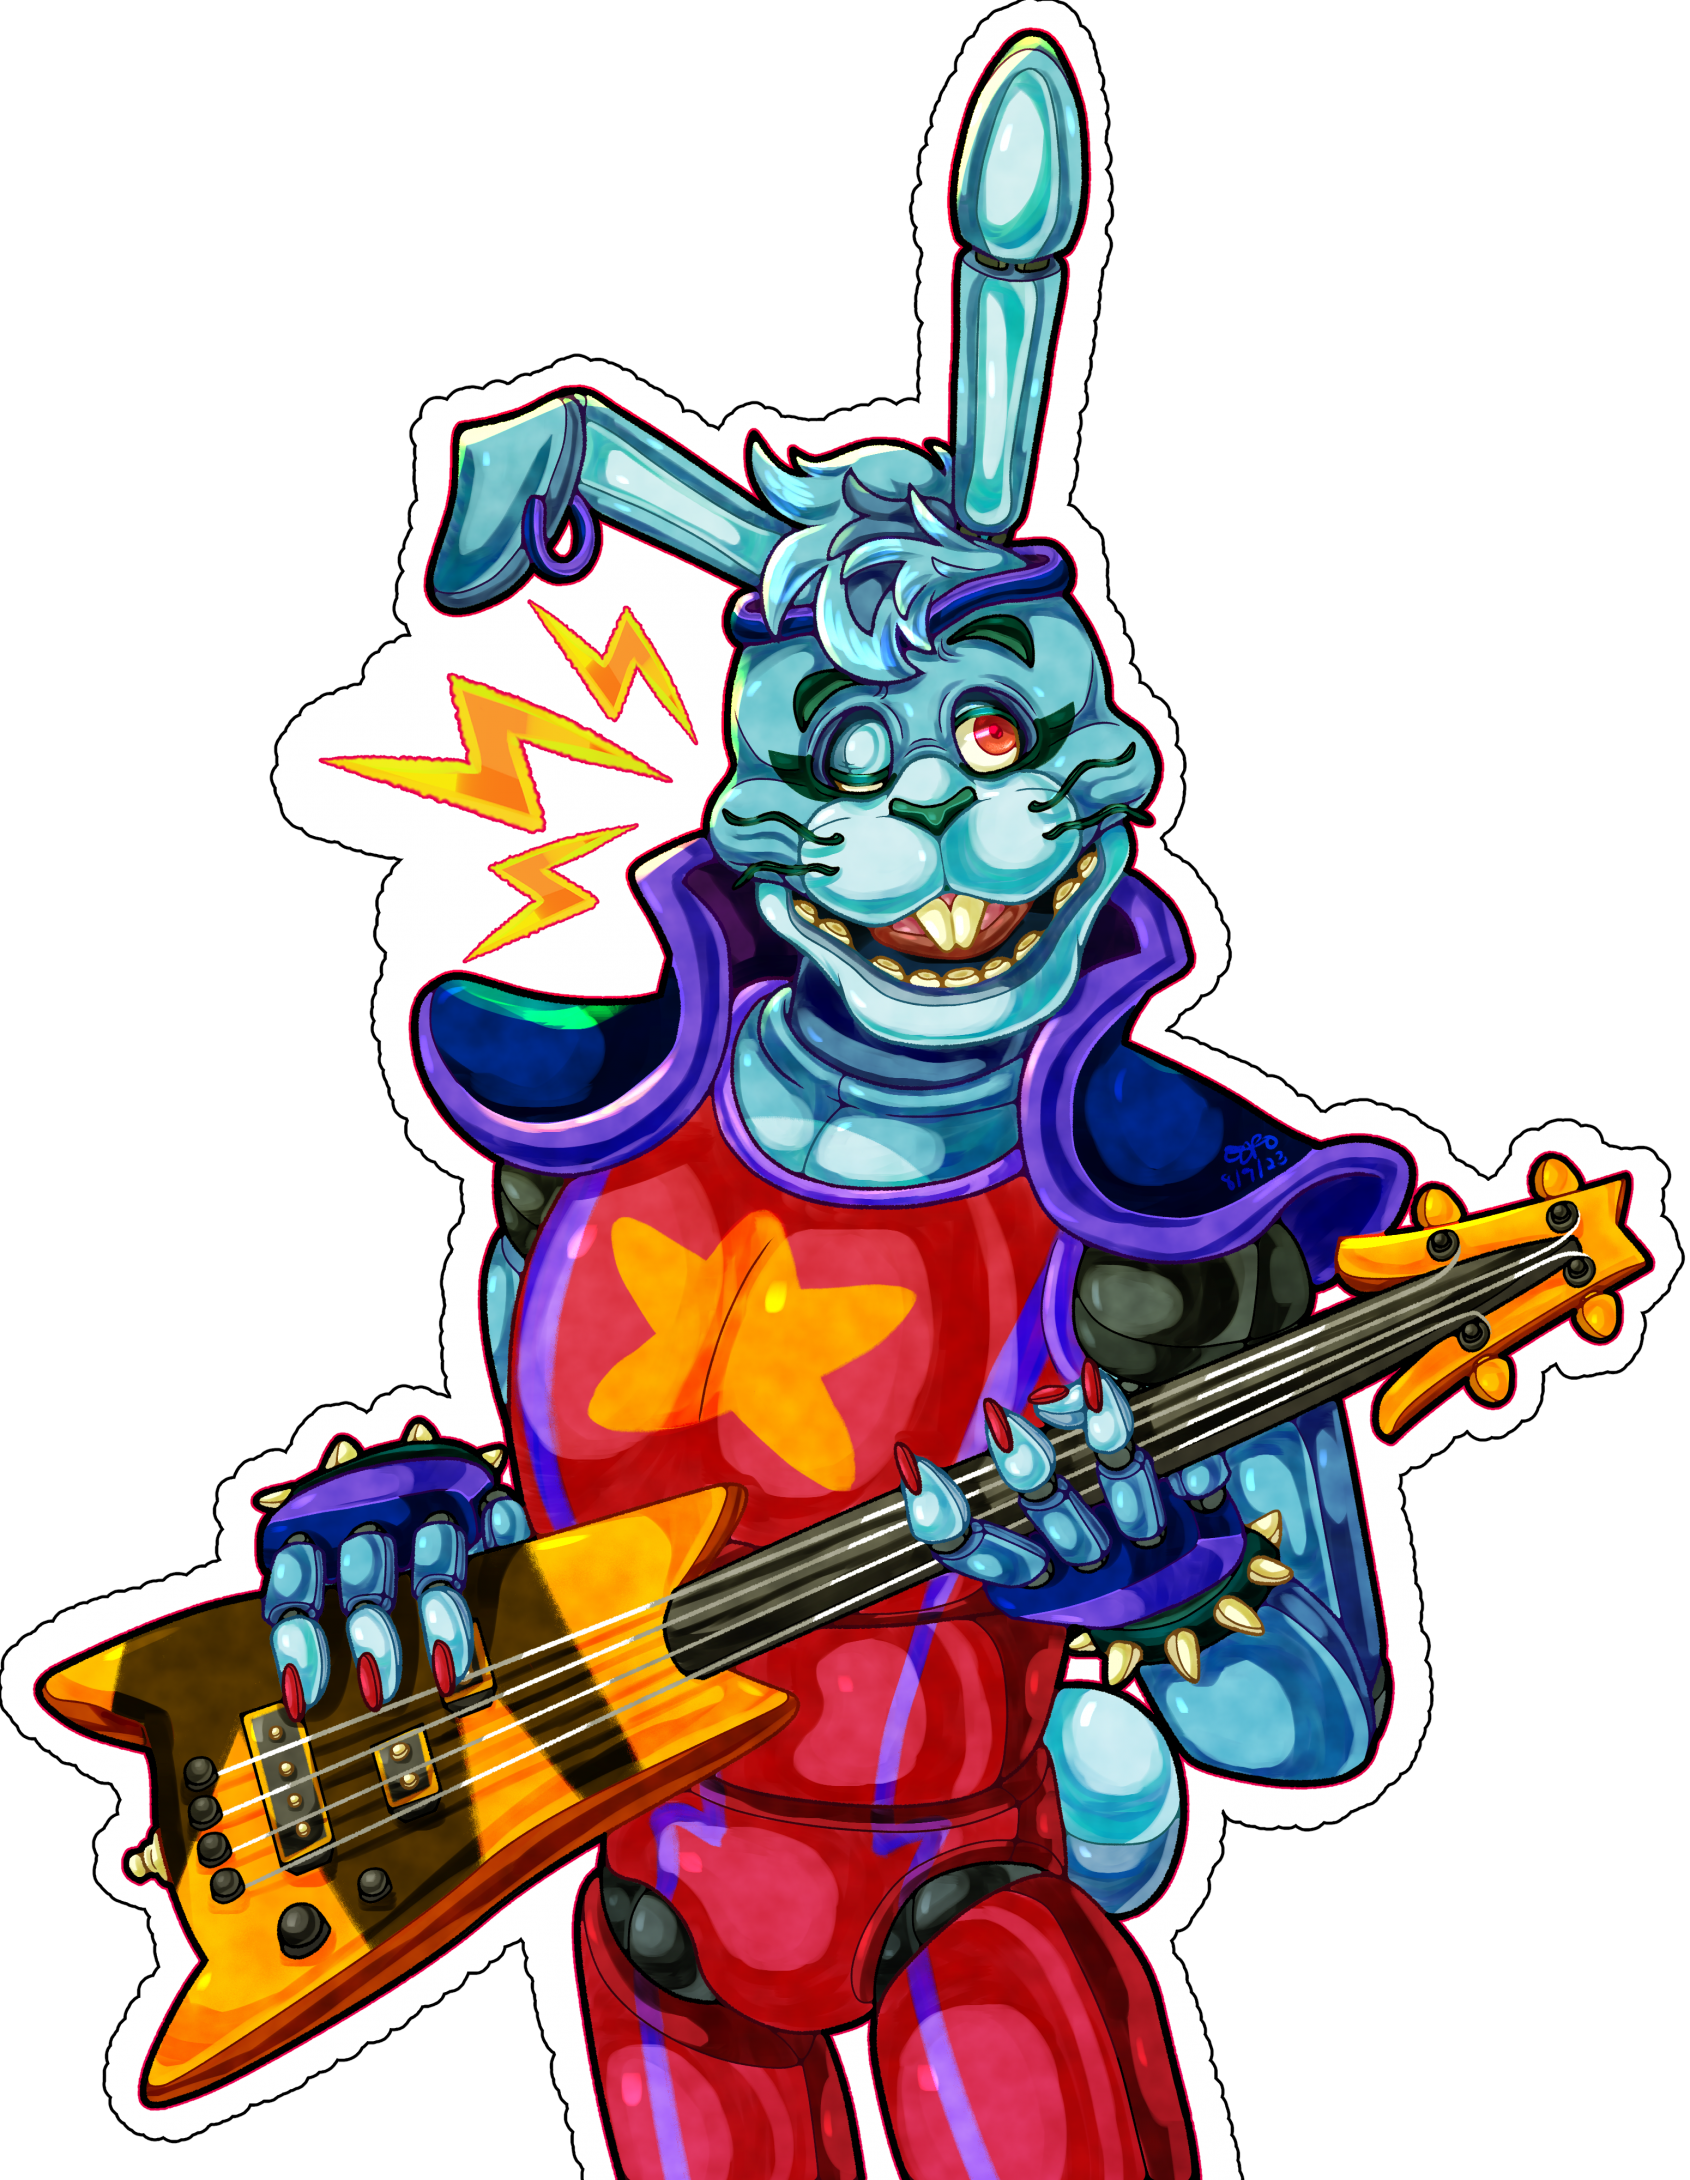 Would you want a Glamrock Bonnie in Ruin?